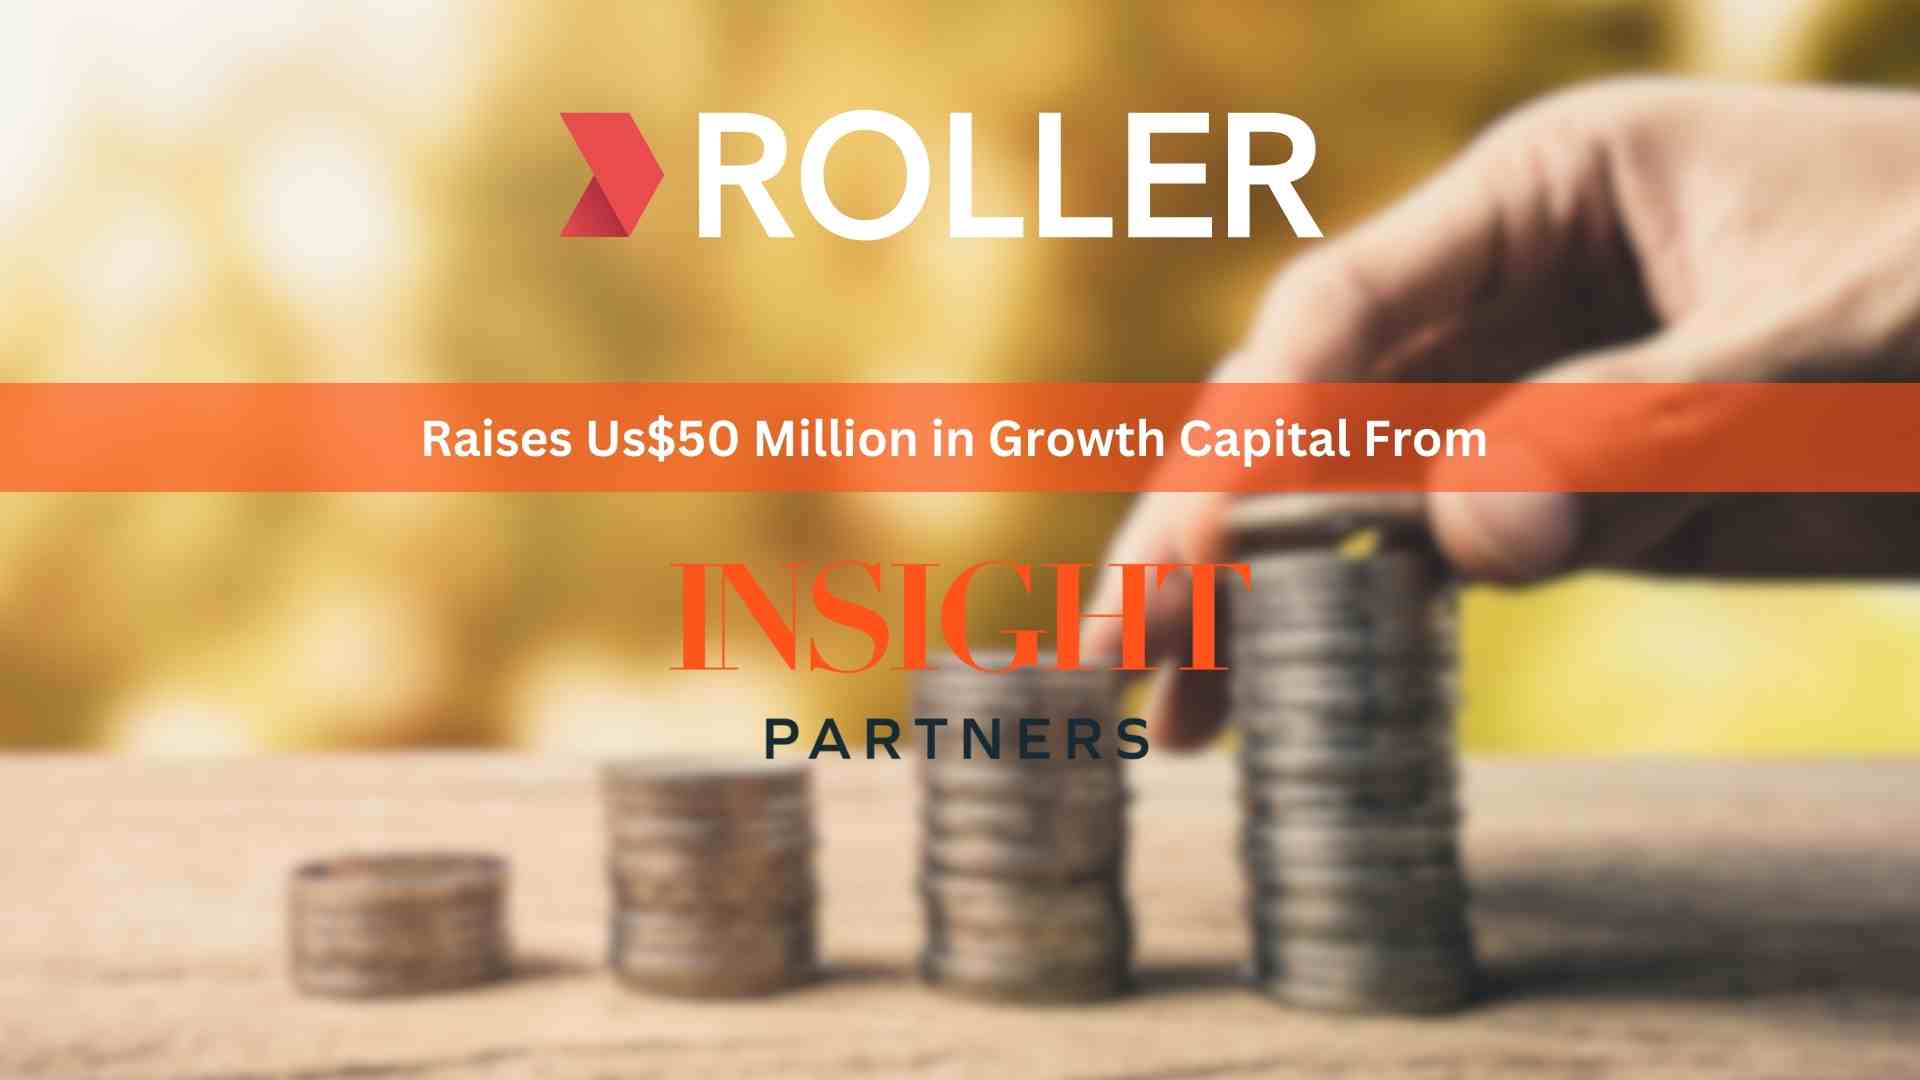 ROLLER raises US$50 million in growth capital from Insight Partners to help leisure and attractions venues deliver exceptional guest experiences